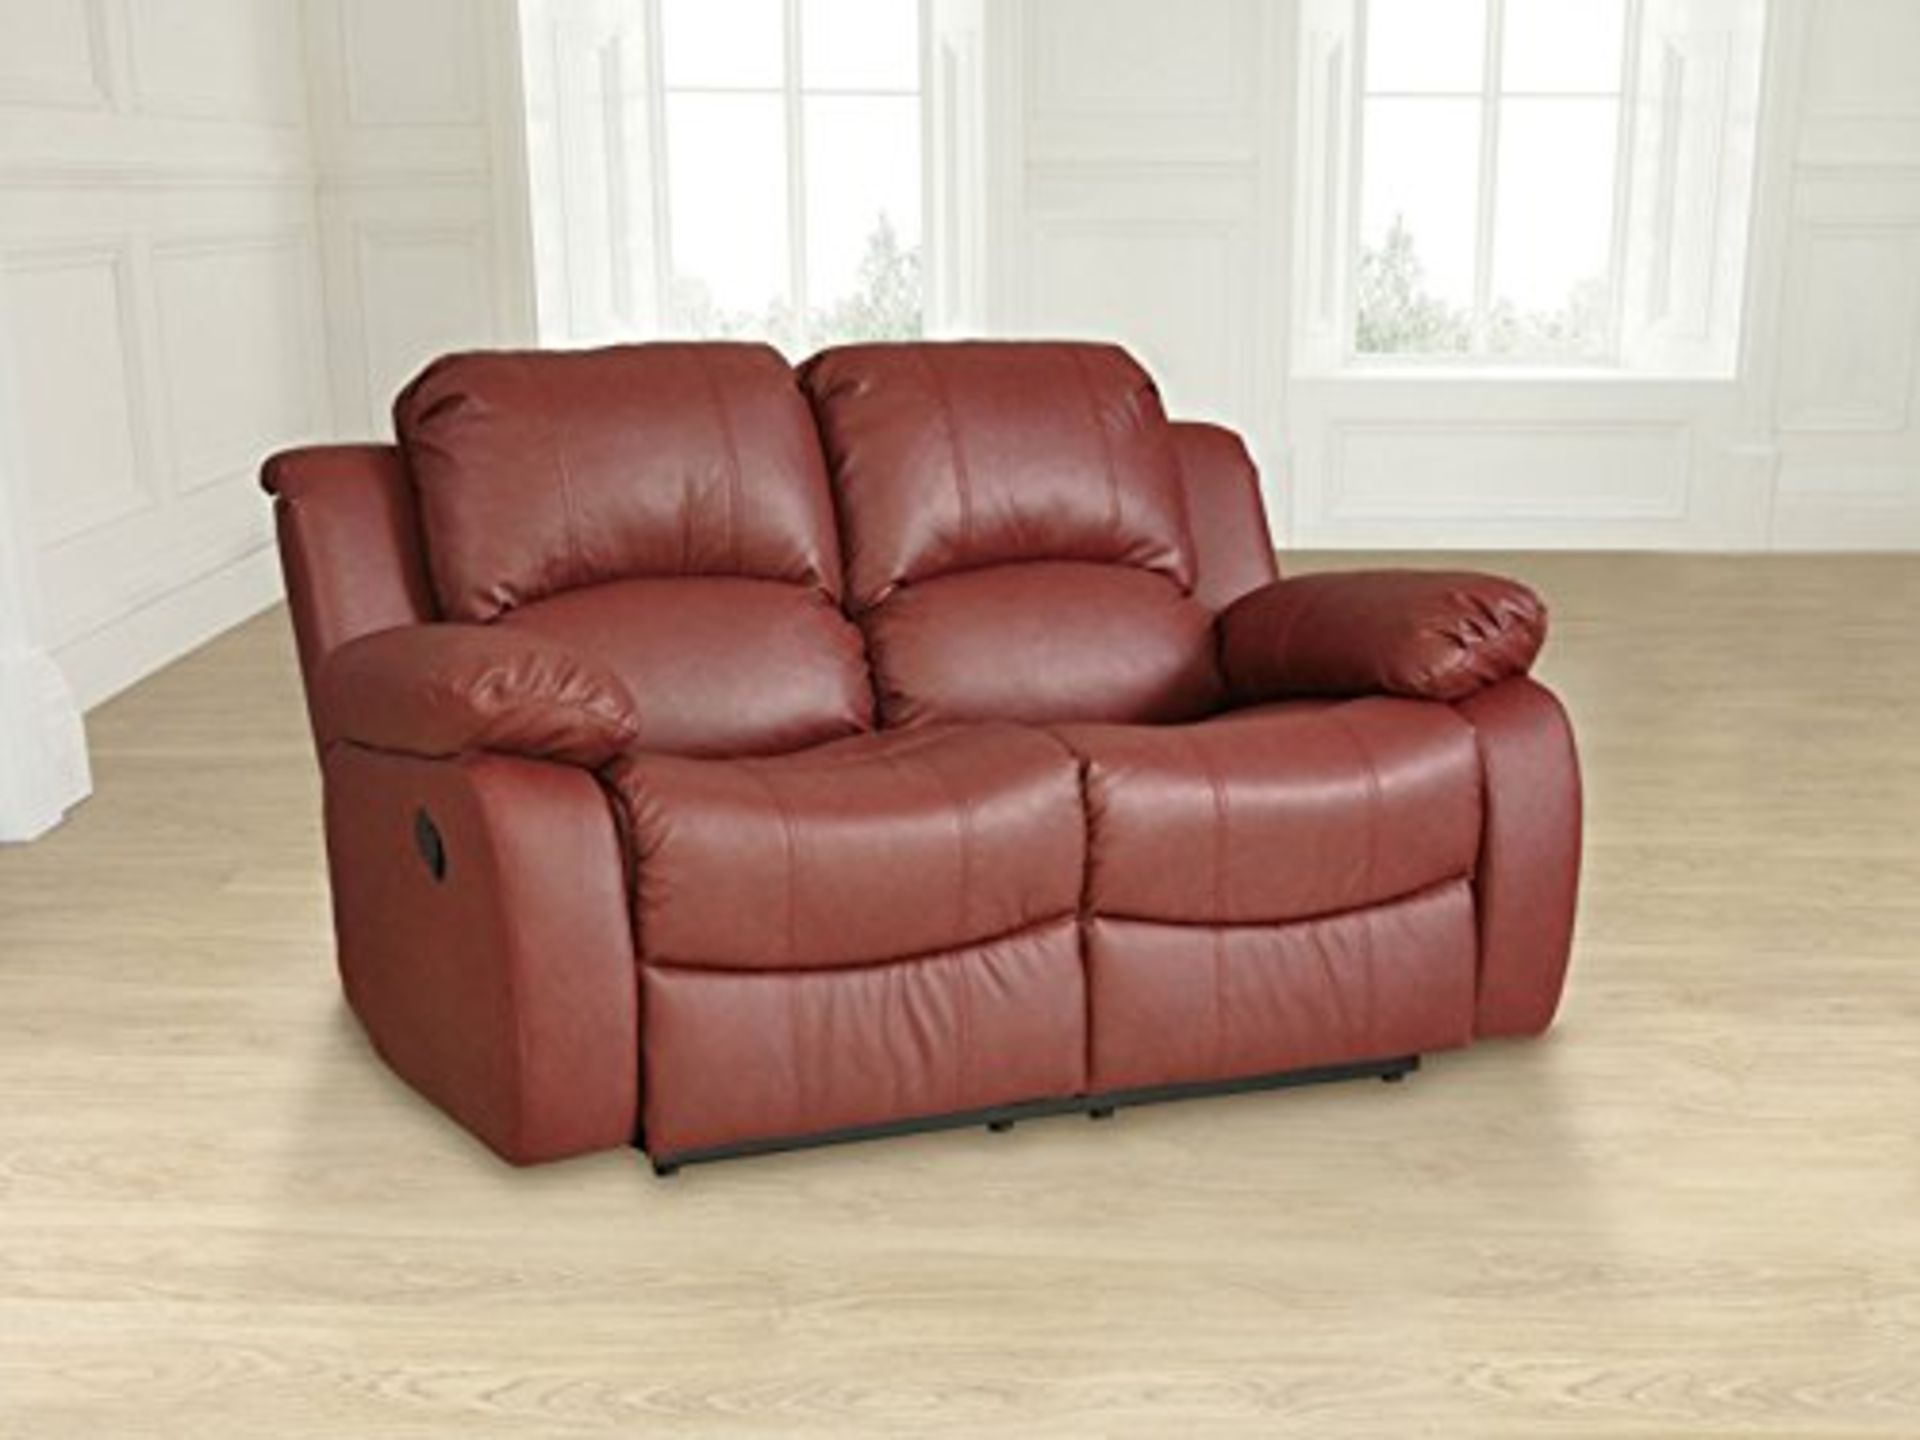 Brand new boxed direct from the manufacturers supreme valance burgandy leather 3 seater sofa with